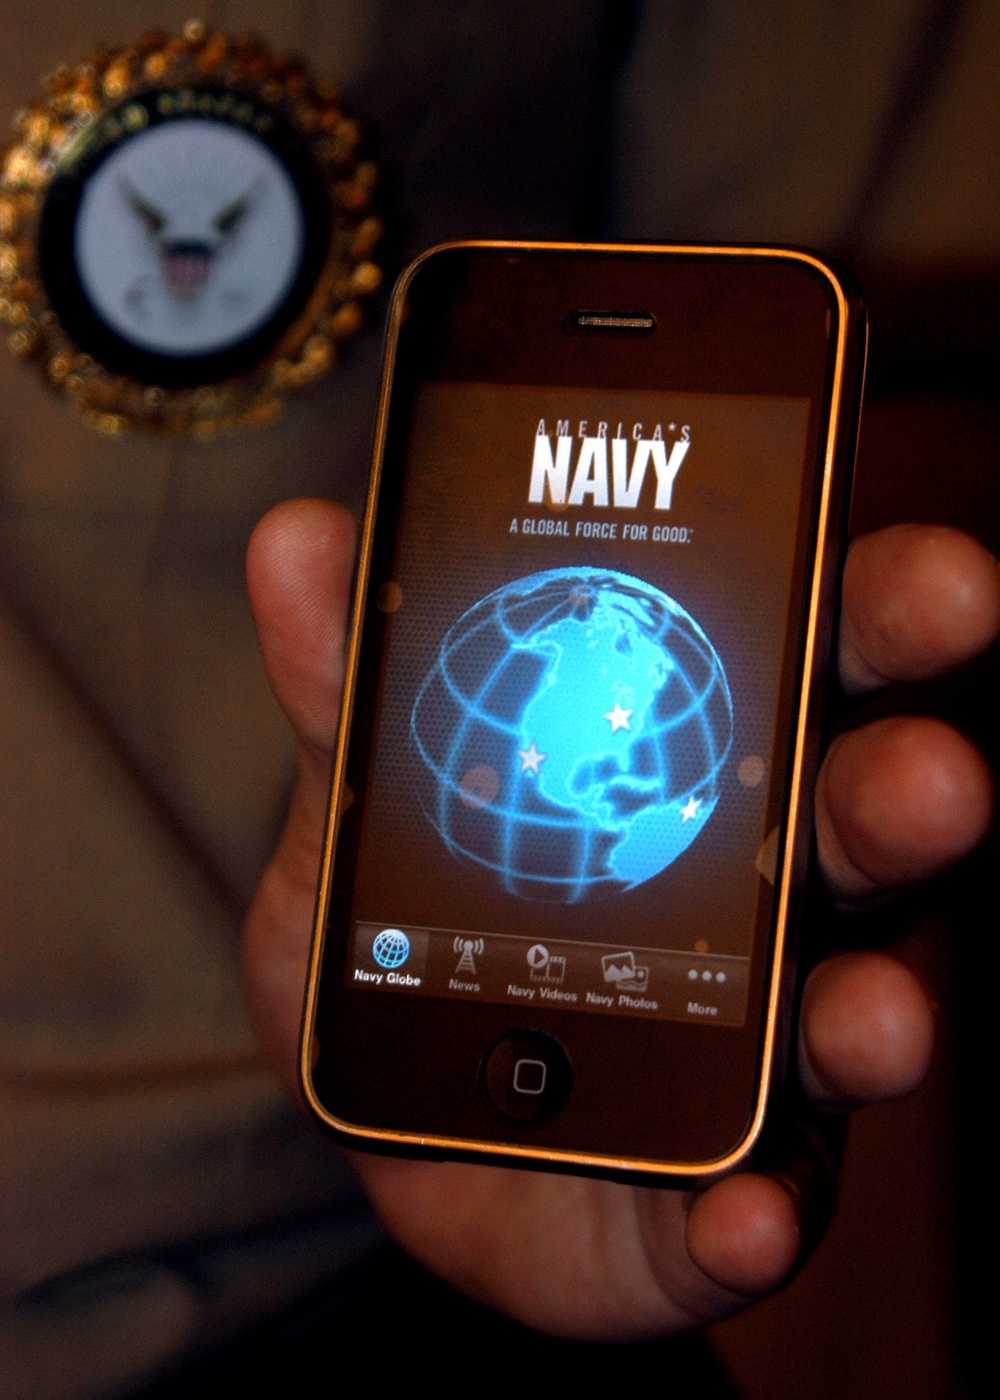 Navy iPhone application